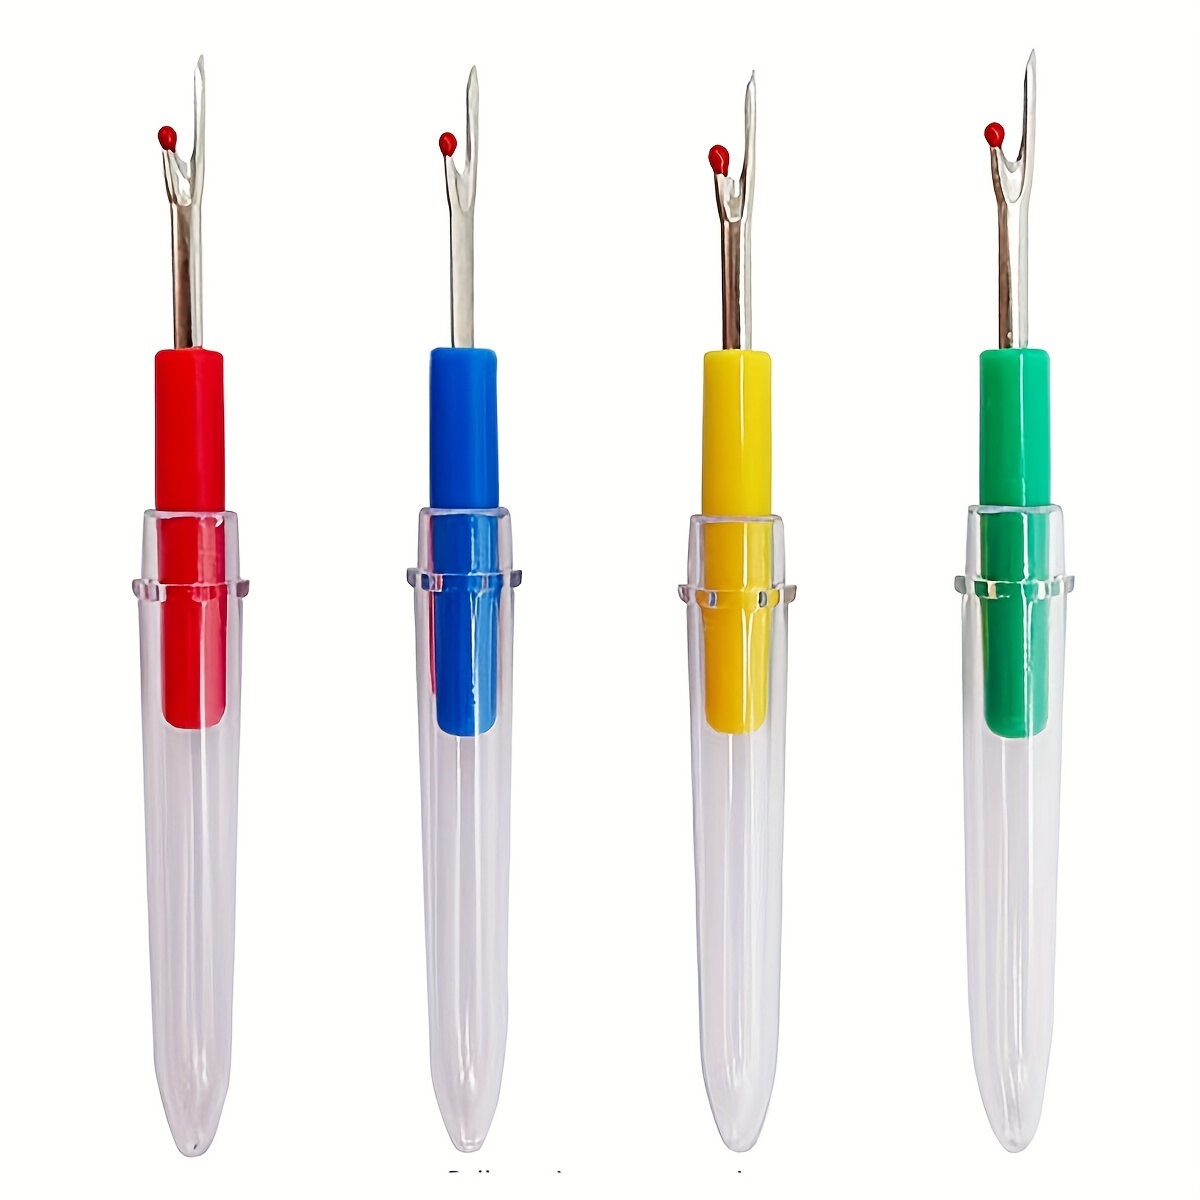 Seam Ripper Sewing Thread Removal  Sewing, Sewing notions, Sewing